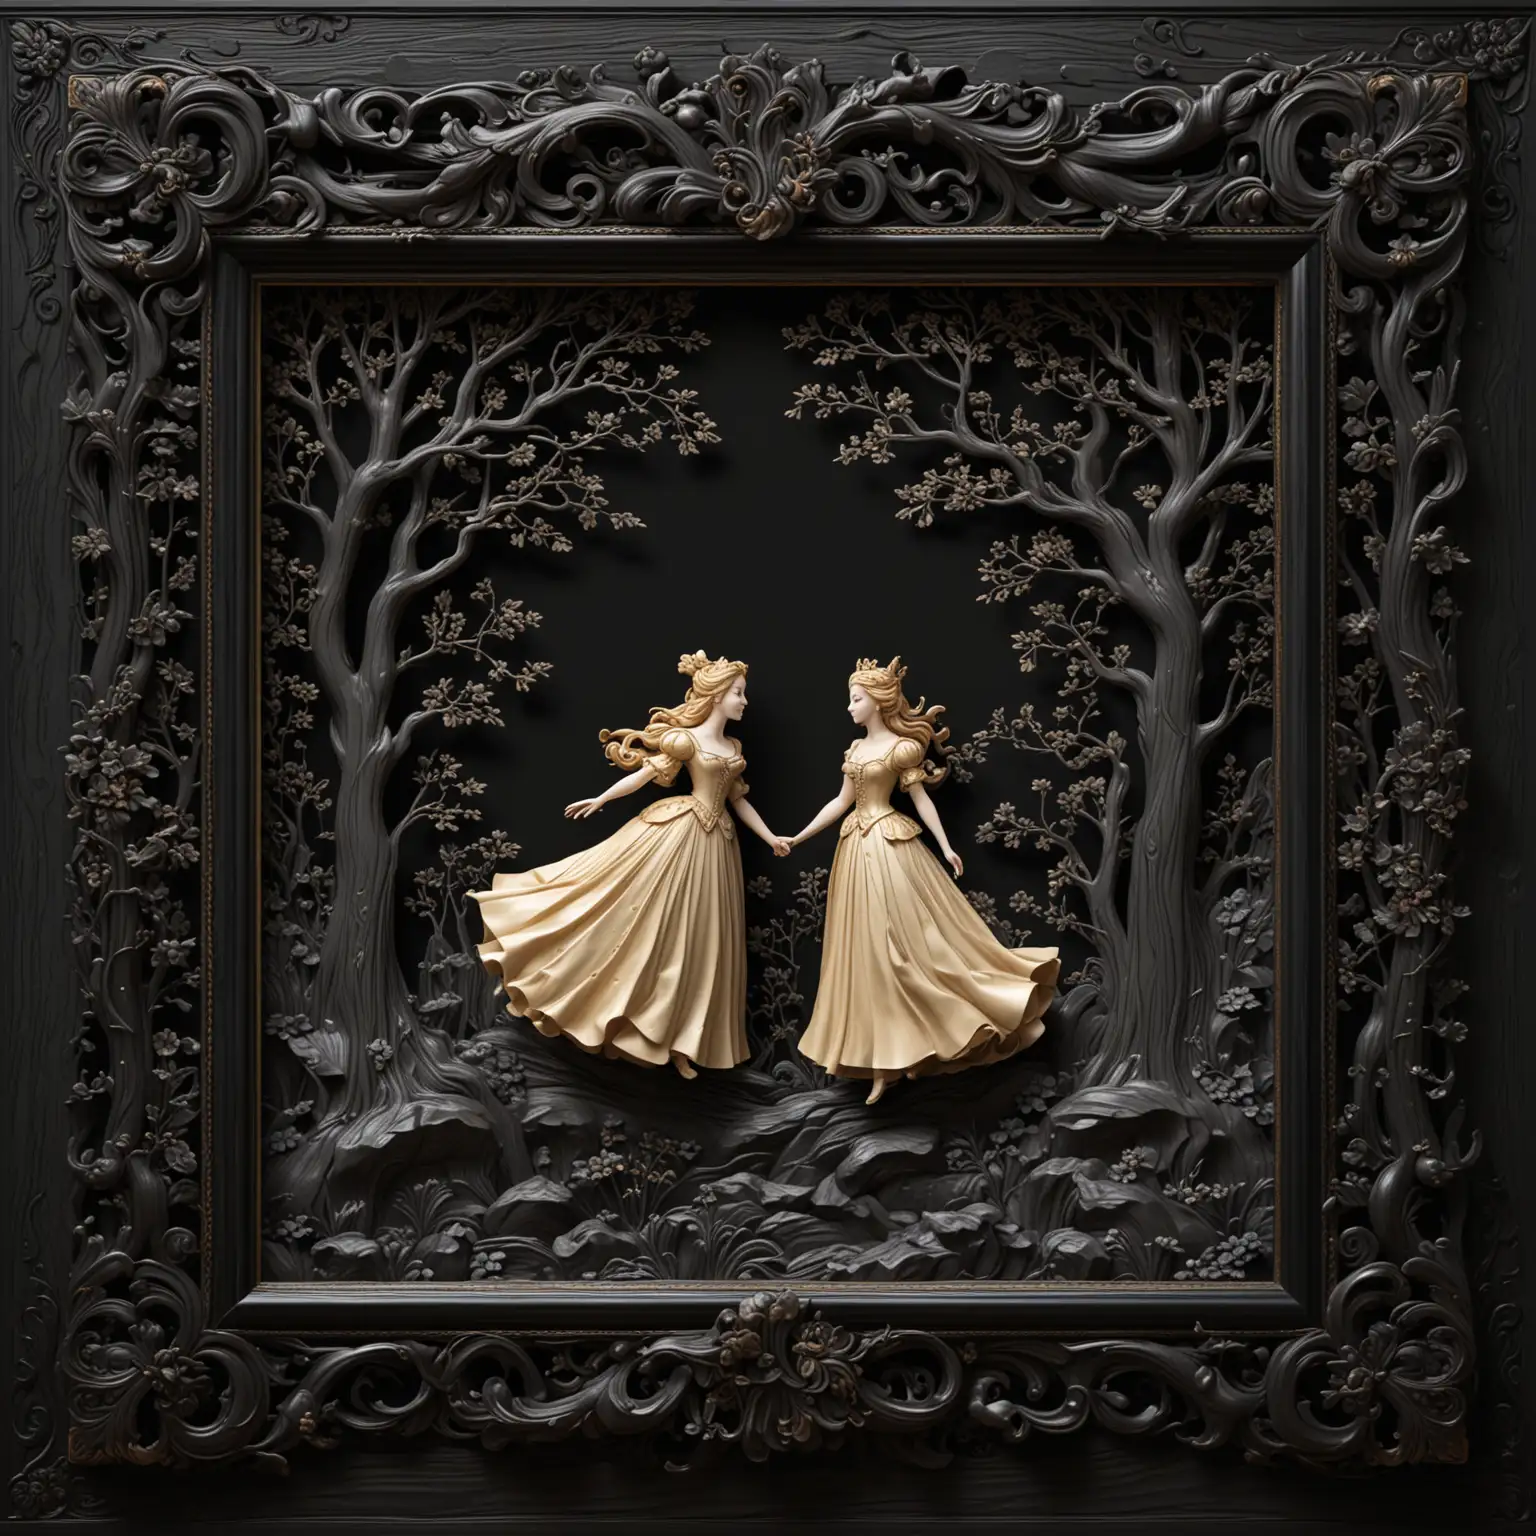 3D SEAMLESS AND TILEABLE BLACK LACQUERED WOOD WITH A FINELY CARVED BLACK LACQUER FRAME SURROUND FEATURING   A FINELY  CARVED WOODEN SCENE FROM THE TWELVE DANCING PRINCESSES







